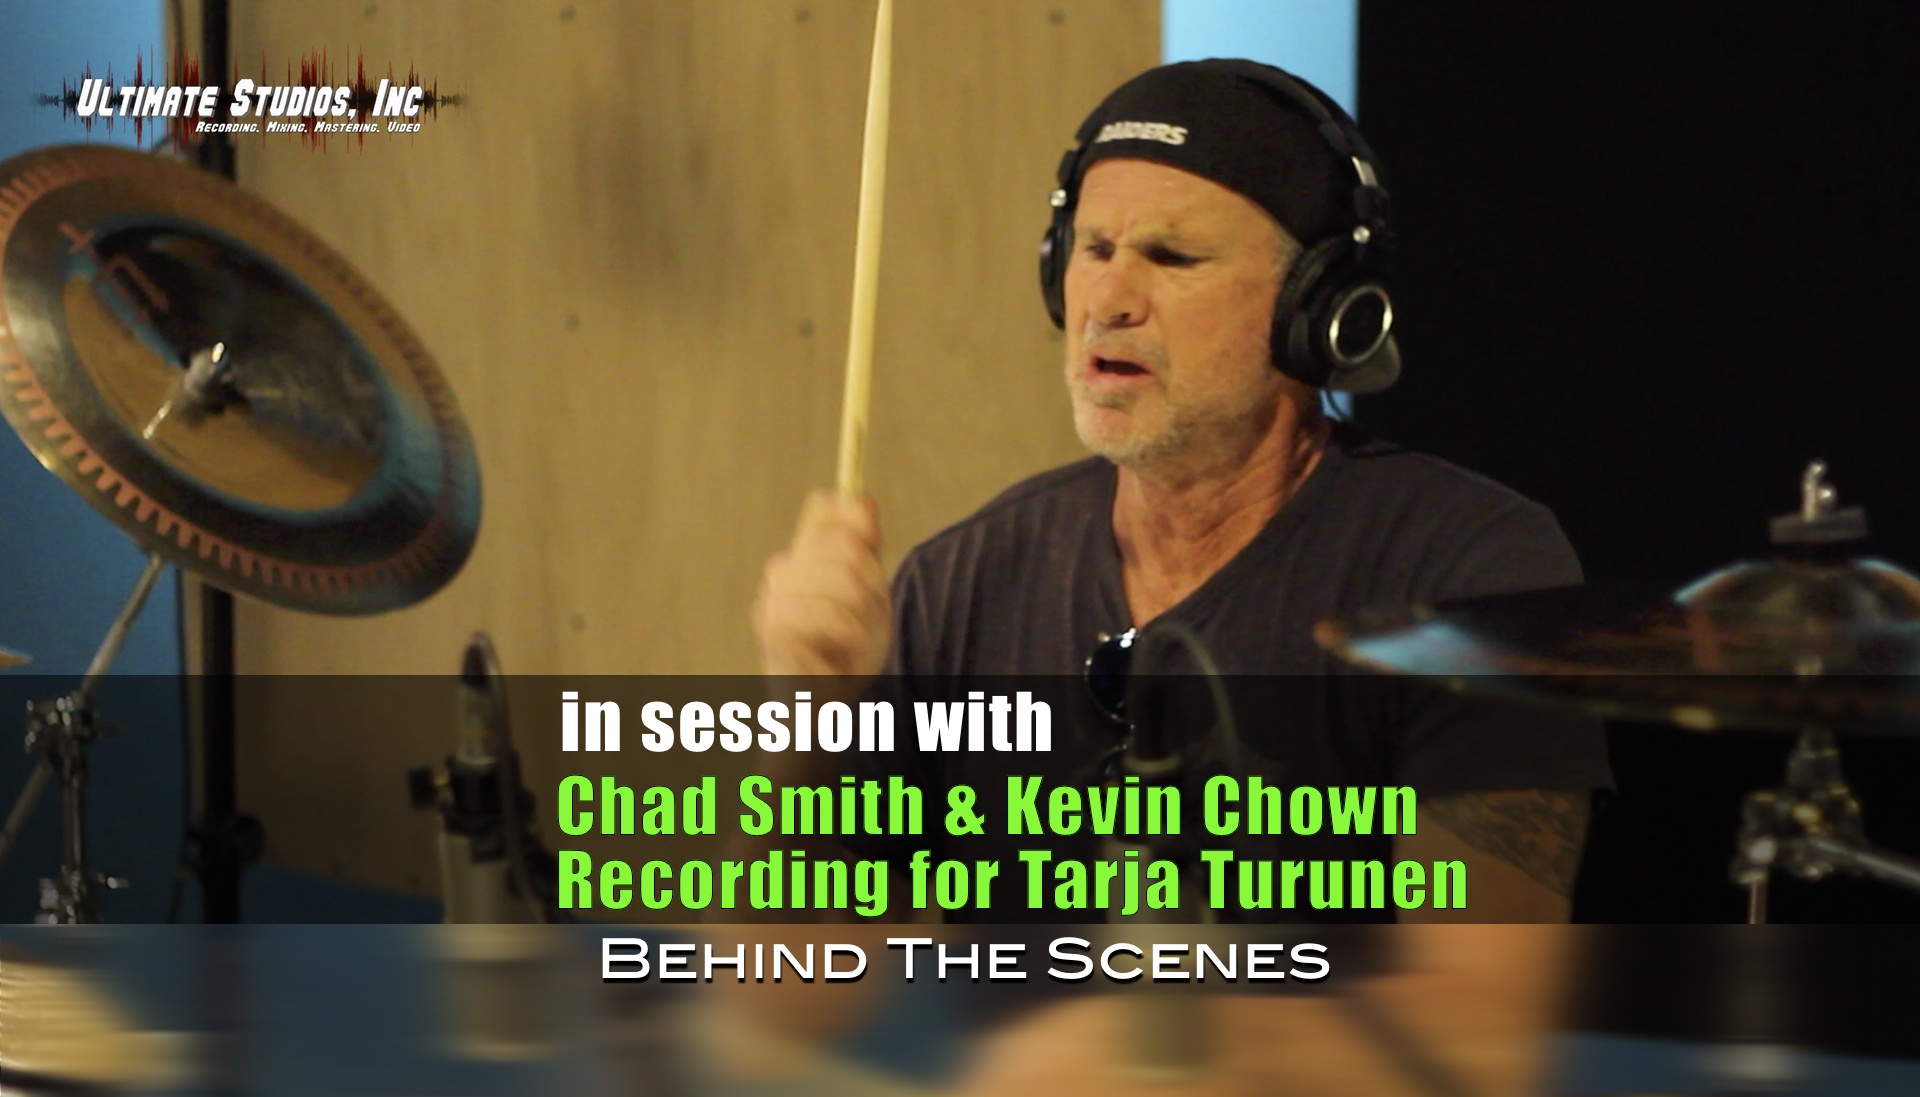 Behind the Scenes with Chad Smith